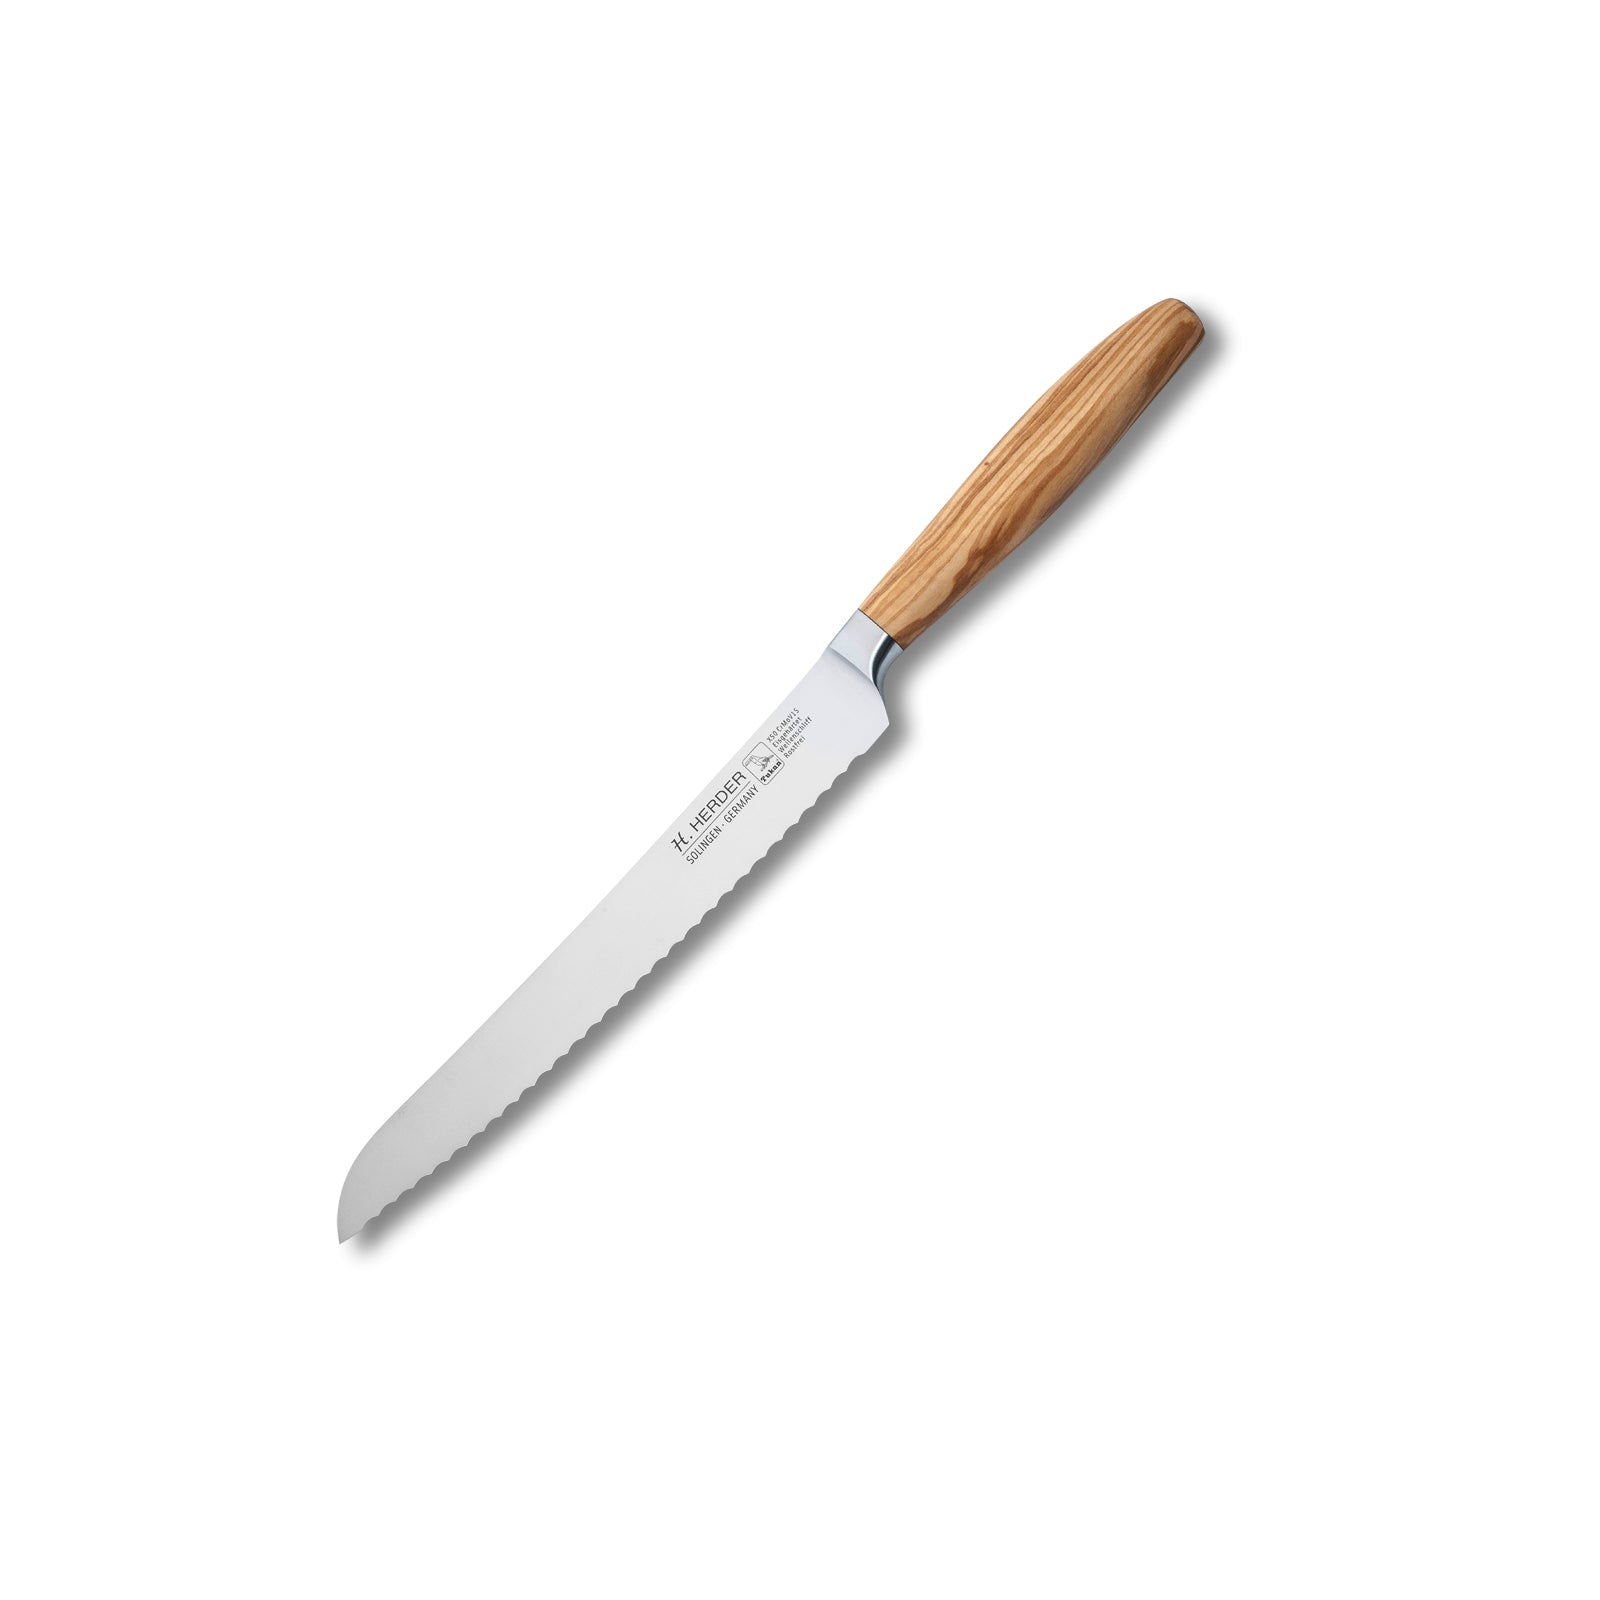 Eterno bread knife, olive wood, blade length 22cm, forged, serrated edge